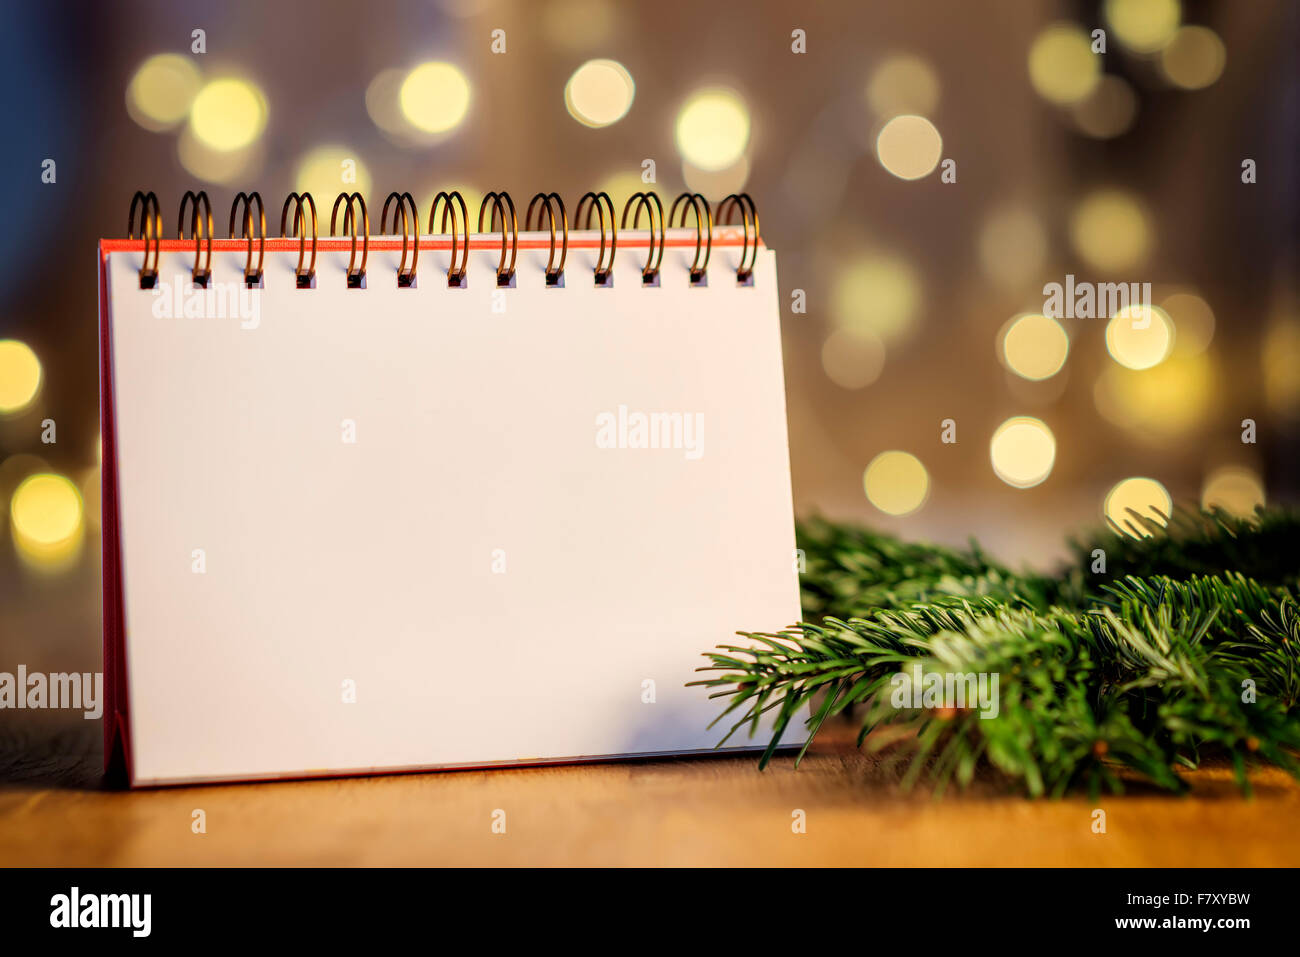 Image of empty ring binder with free space, branch and blur lights in background Stock Photo